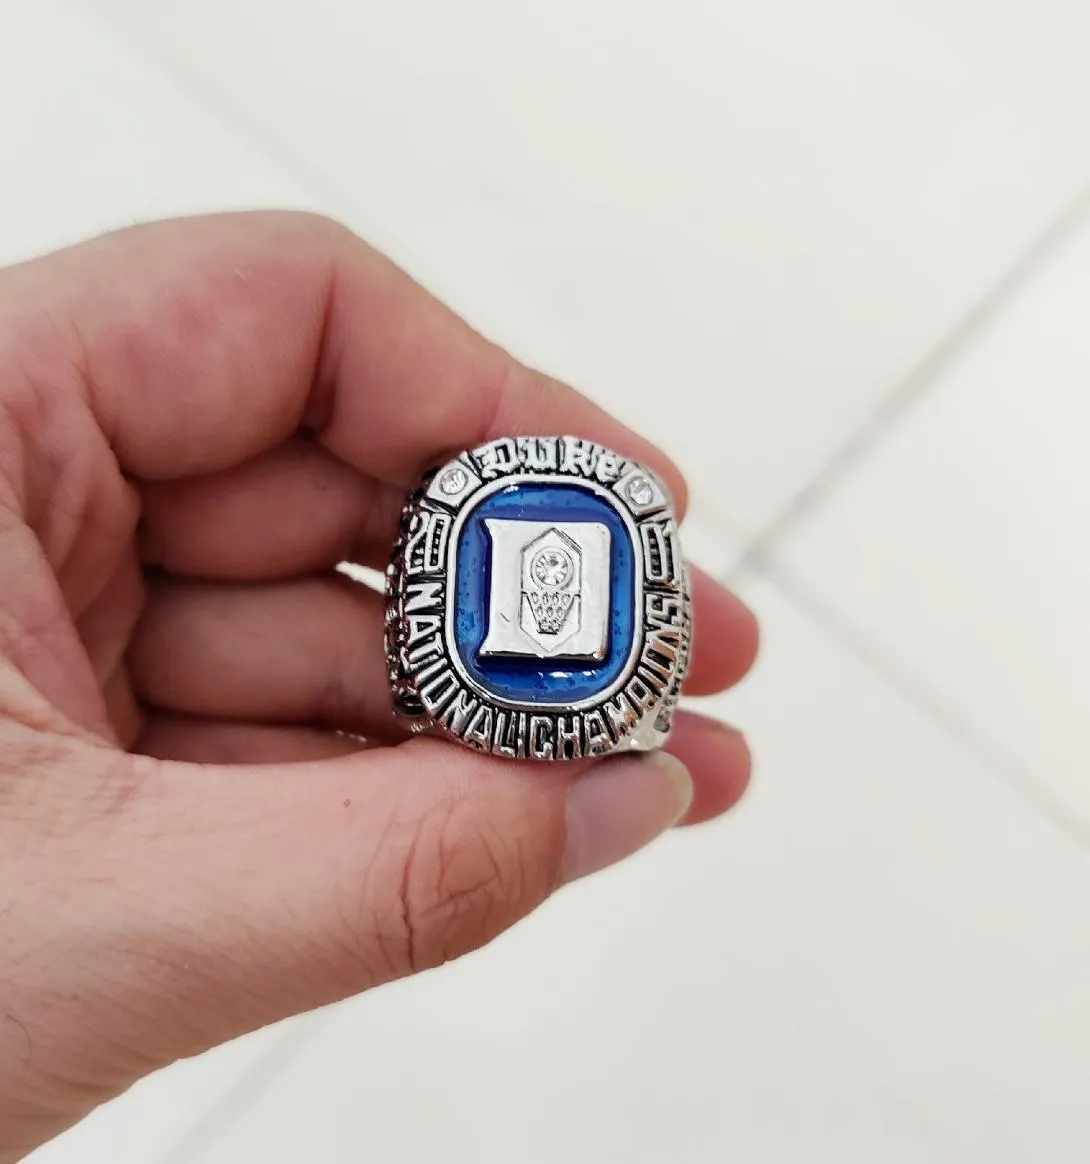 2001 Duke Blue Devils Basketball National Champions Ring With Wooden Display box Sport souvenir Fan Promotion Gift whole4401277